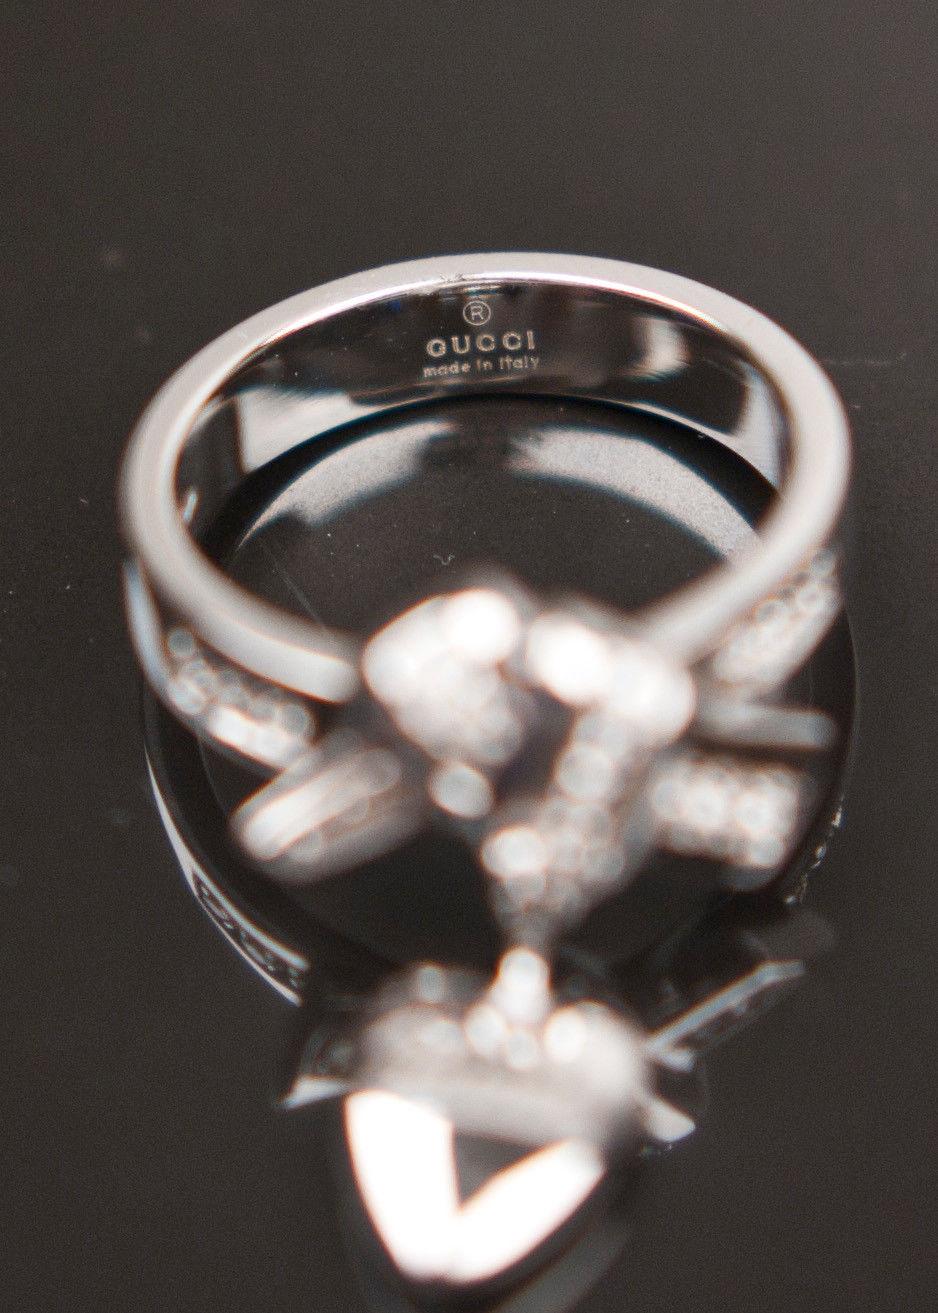 VINTAGE GUCCI 18K WHITE GOLD HEART CHARM RING with DIAMONDS 2